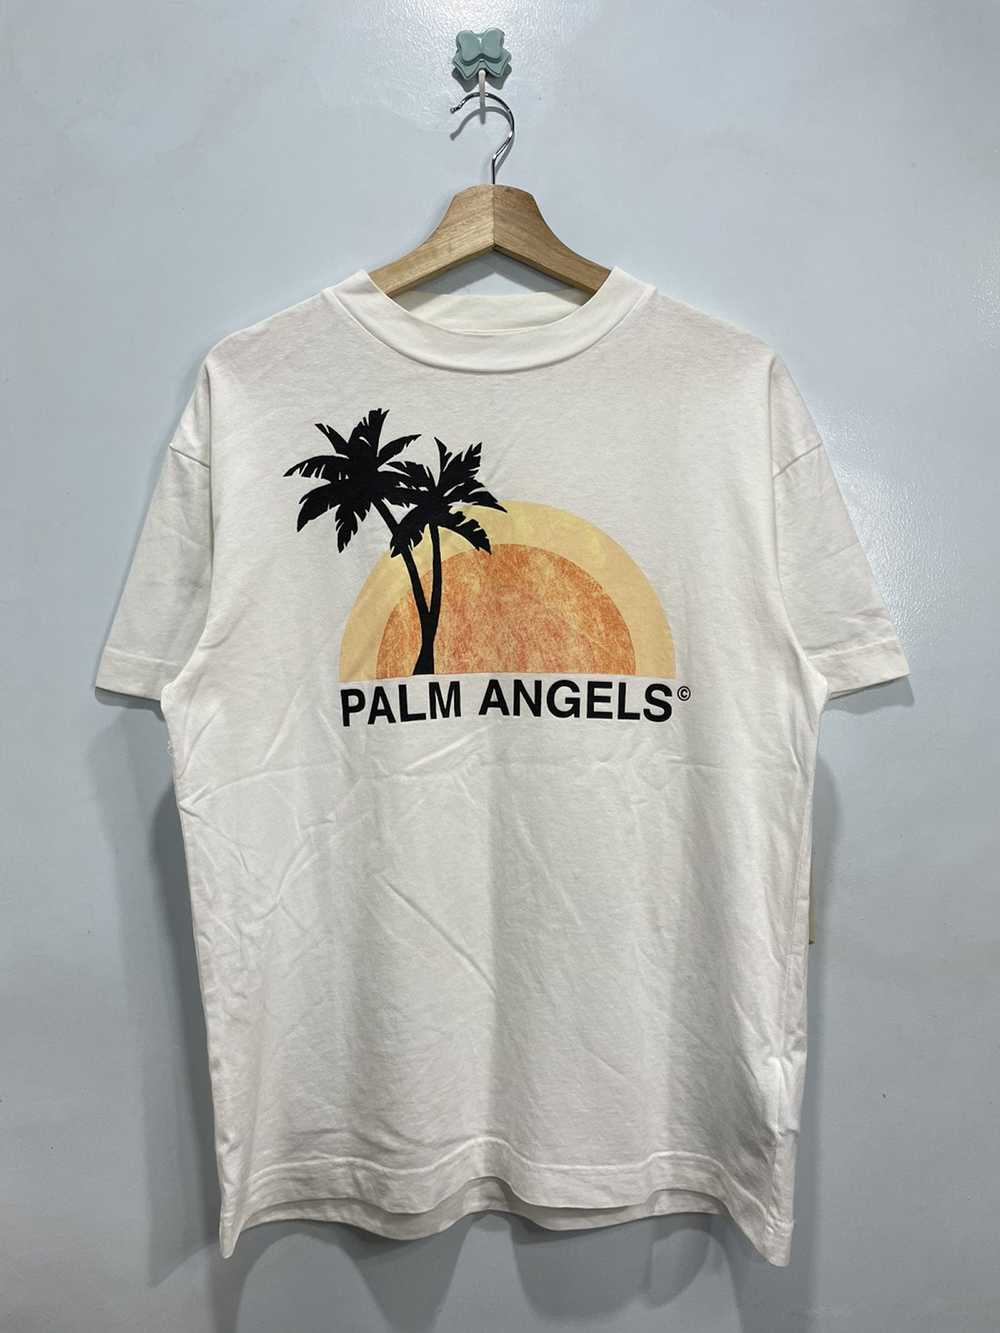 Palm Angels Palm Angels Sunset Tee - image 1